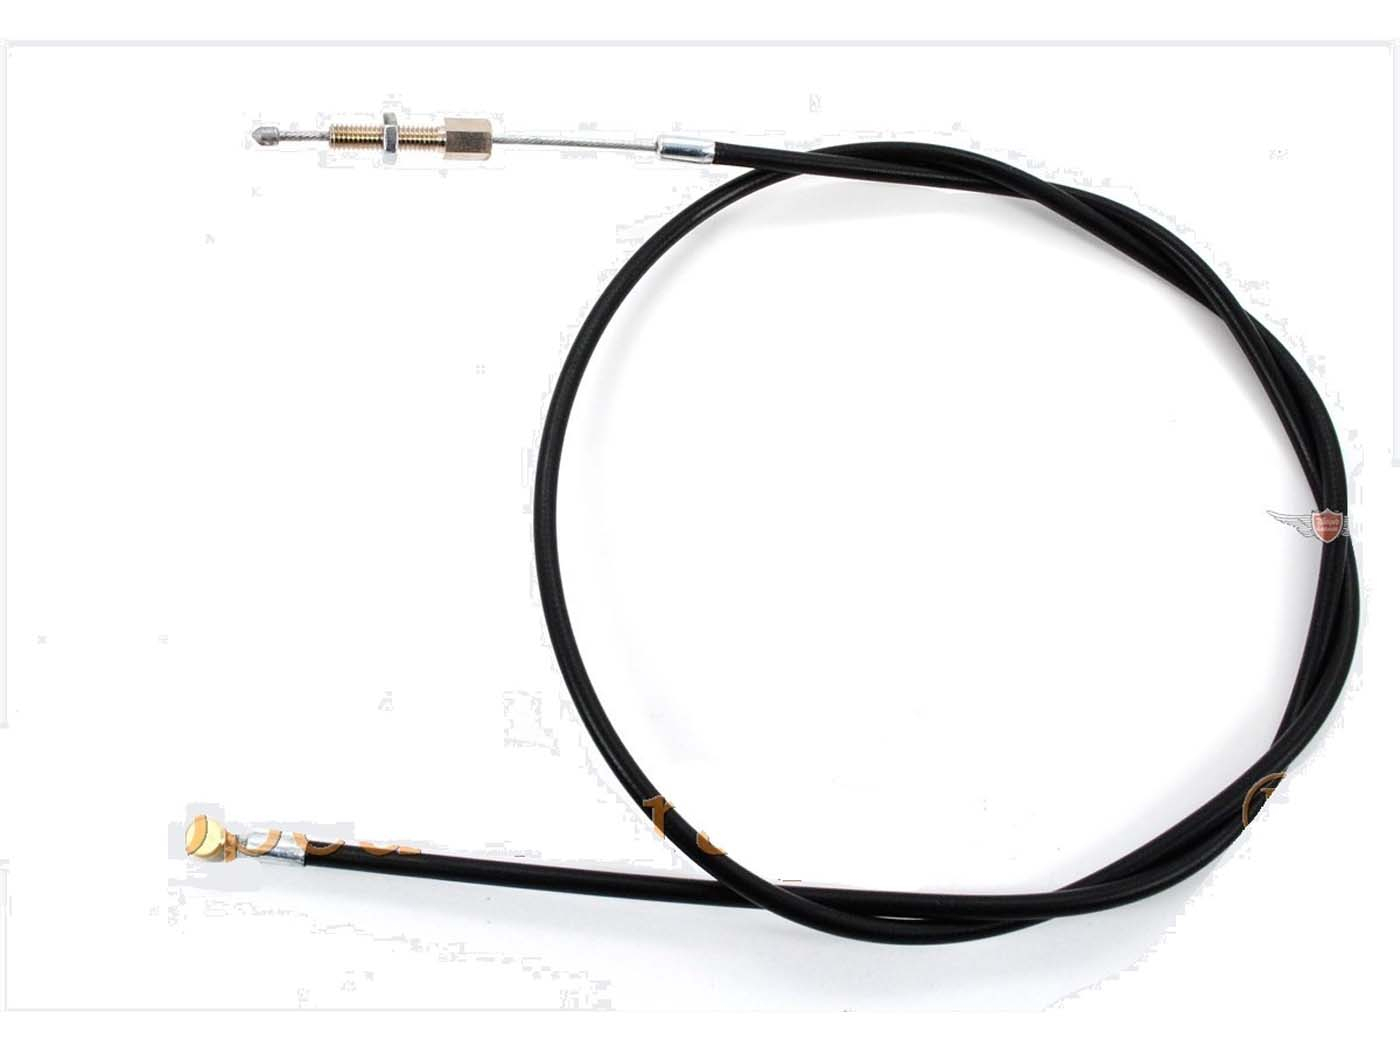 Engine Clutch Clutch Cable Bowden Cable For Express Radexi Motorcycle